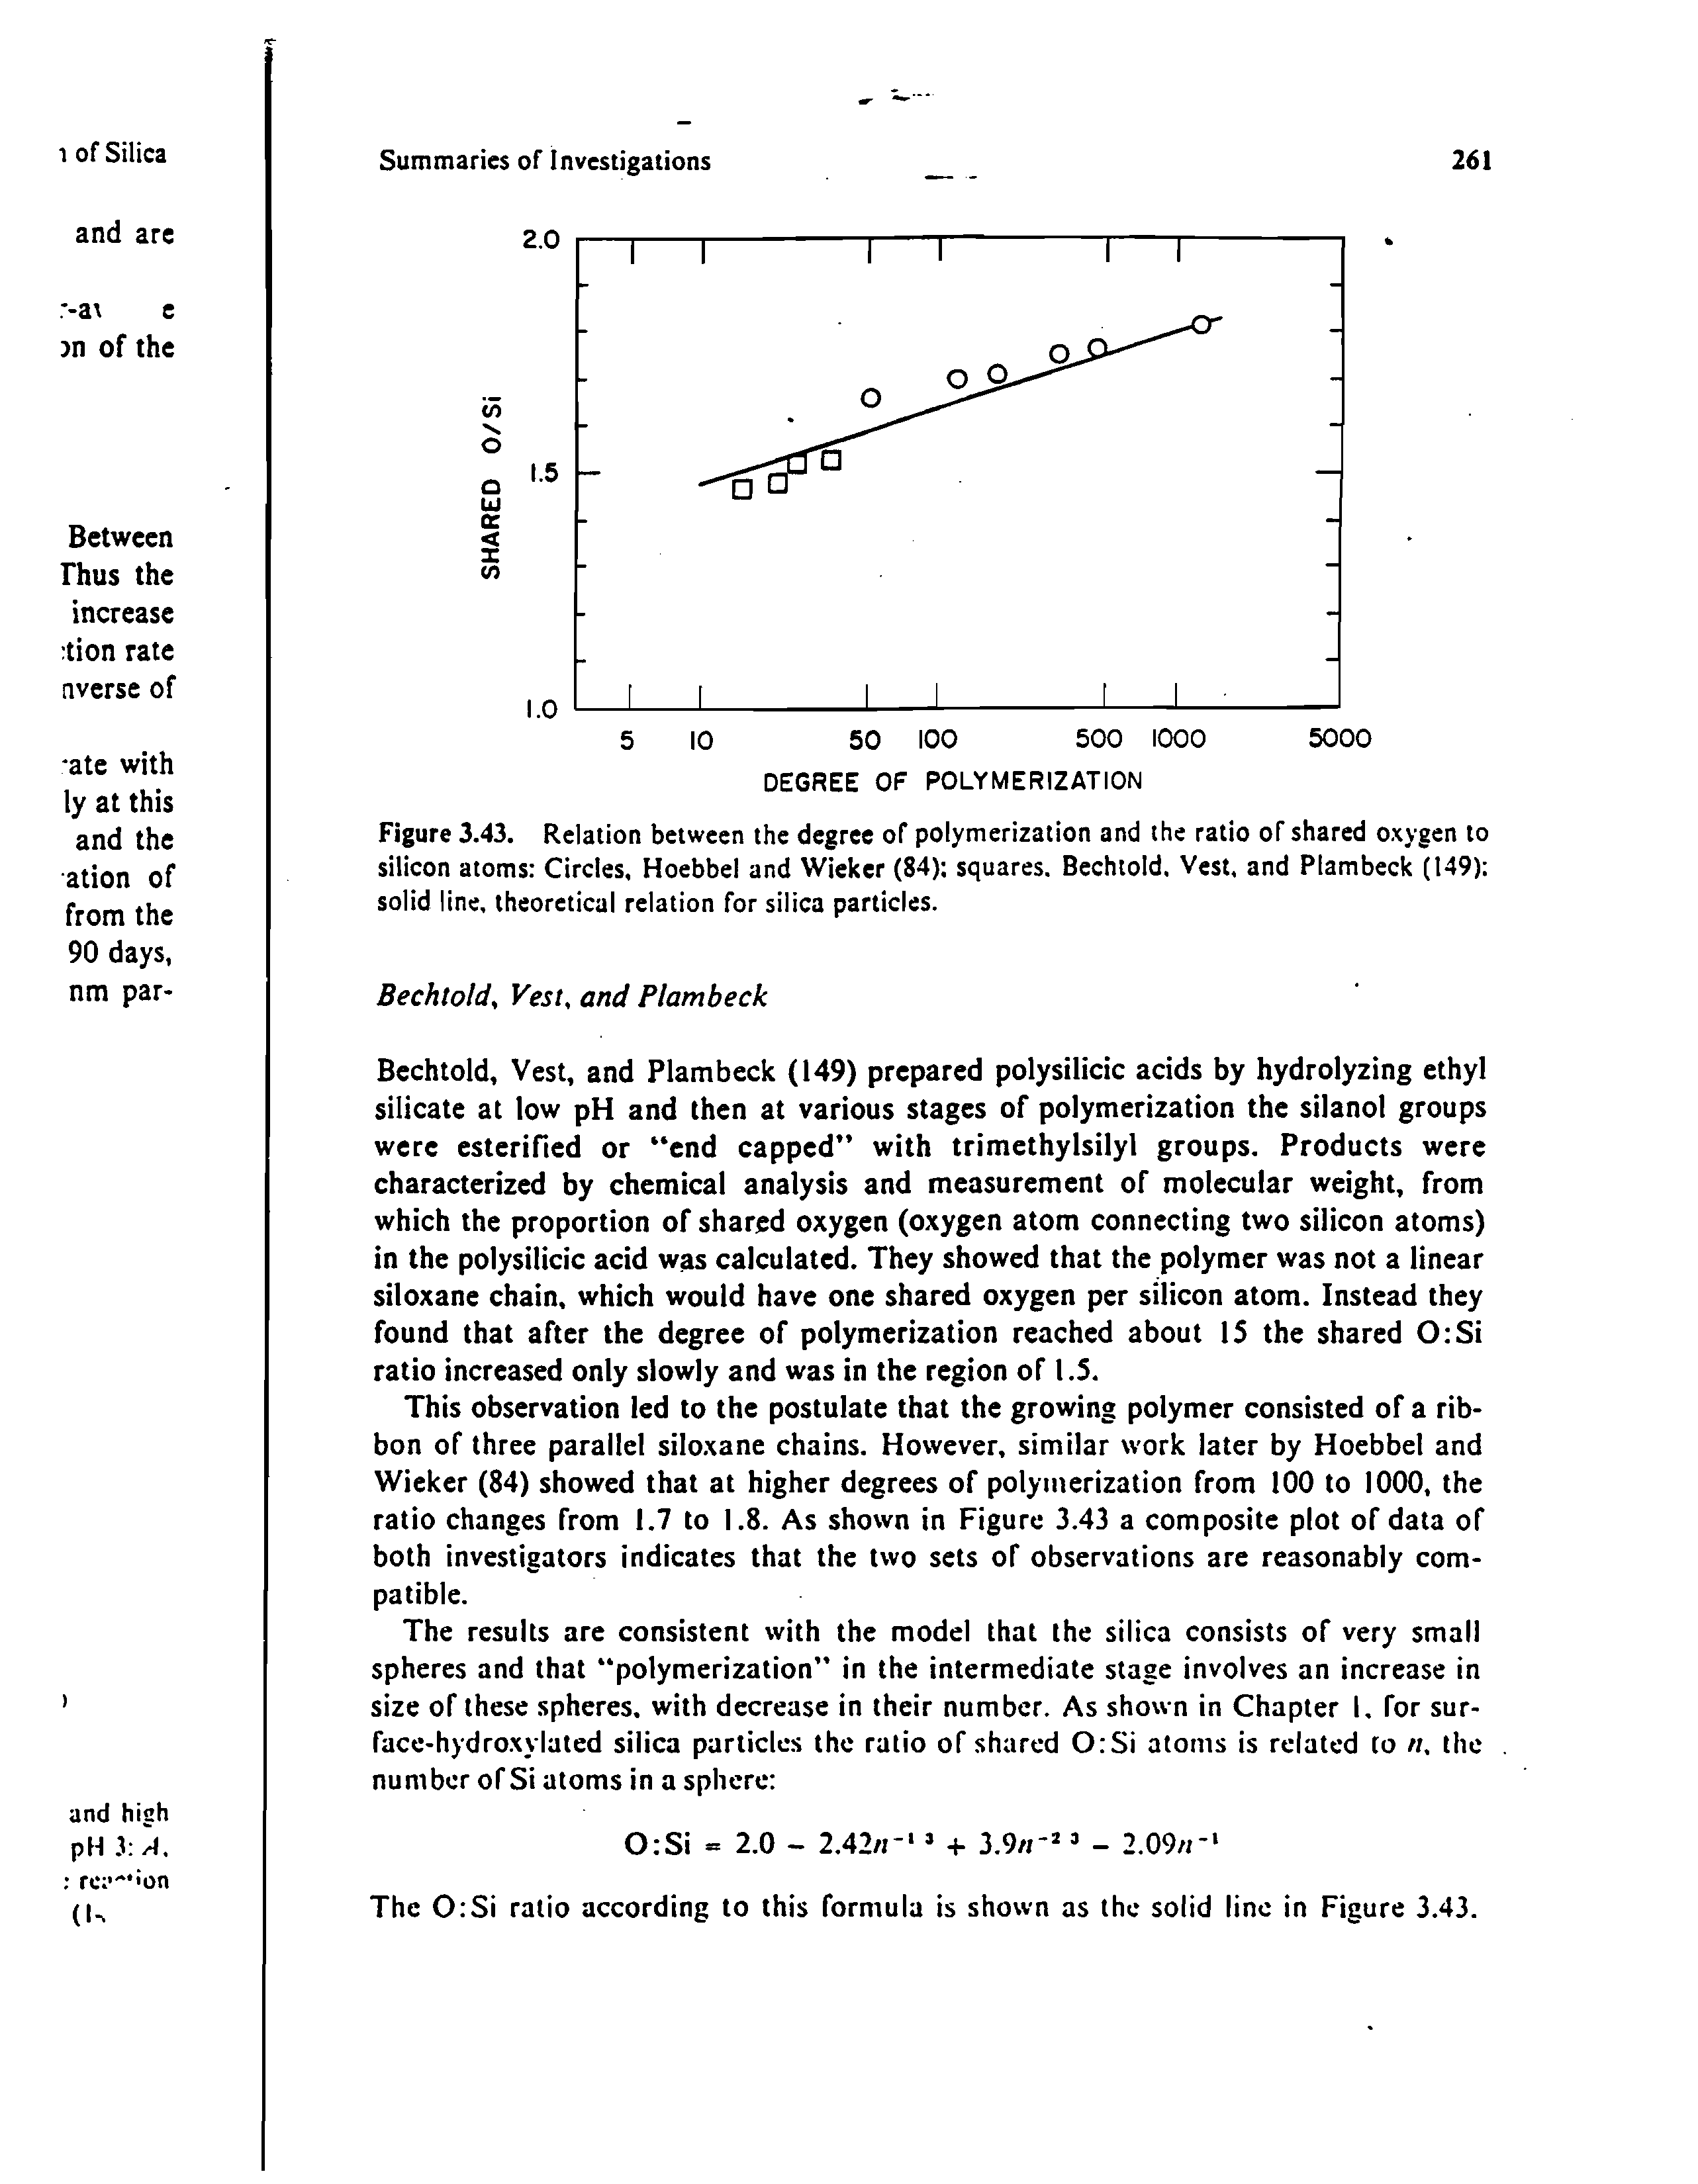 Figure 3.43. Relation between the degree of polymerization and the ratio of shared oxygen to silicon atoms Circles. Hoebbel and Wieker (84) squares. Bcchtold. Vest, and Plambeck (149) solid line, theoretical relation for silica particles.